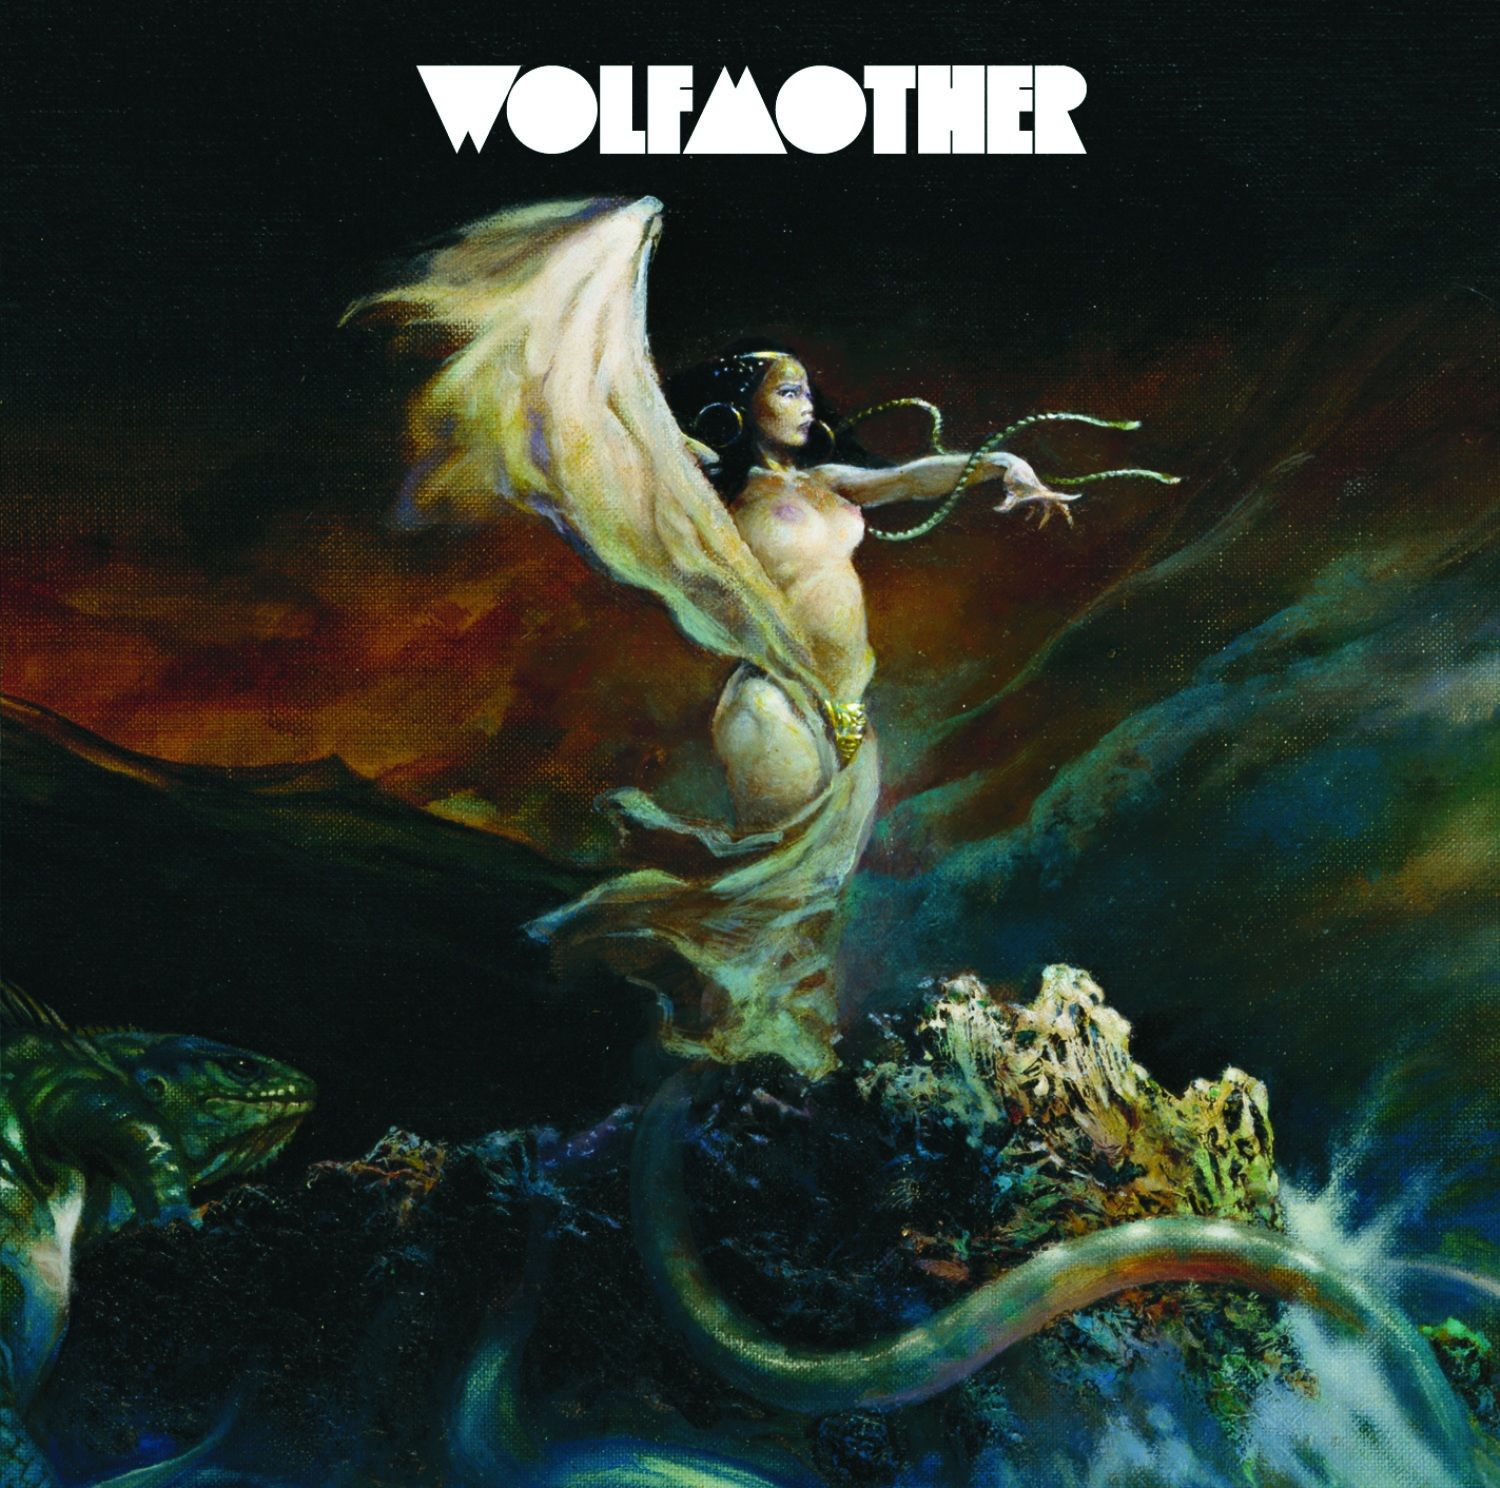 Wolfmother - Wolfmother: 10th Anniversary Vinyl LP